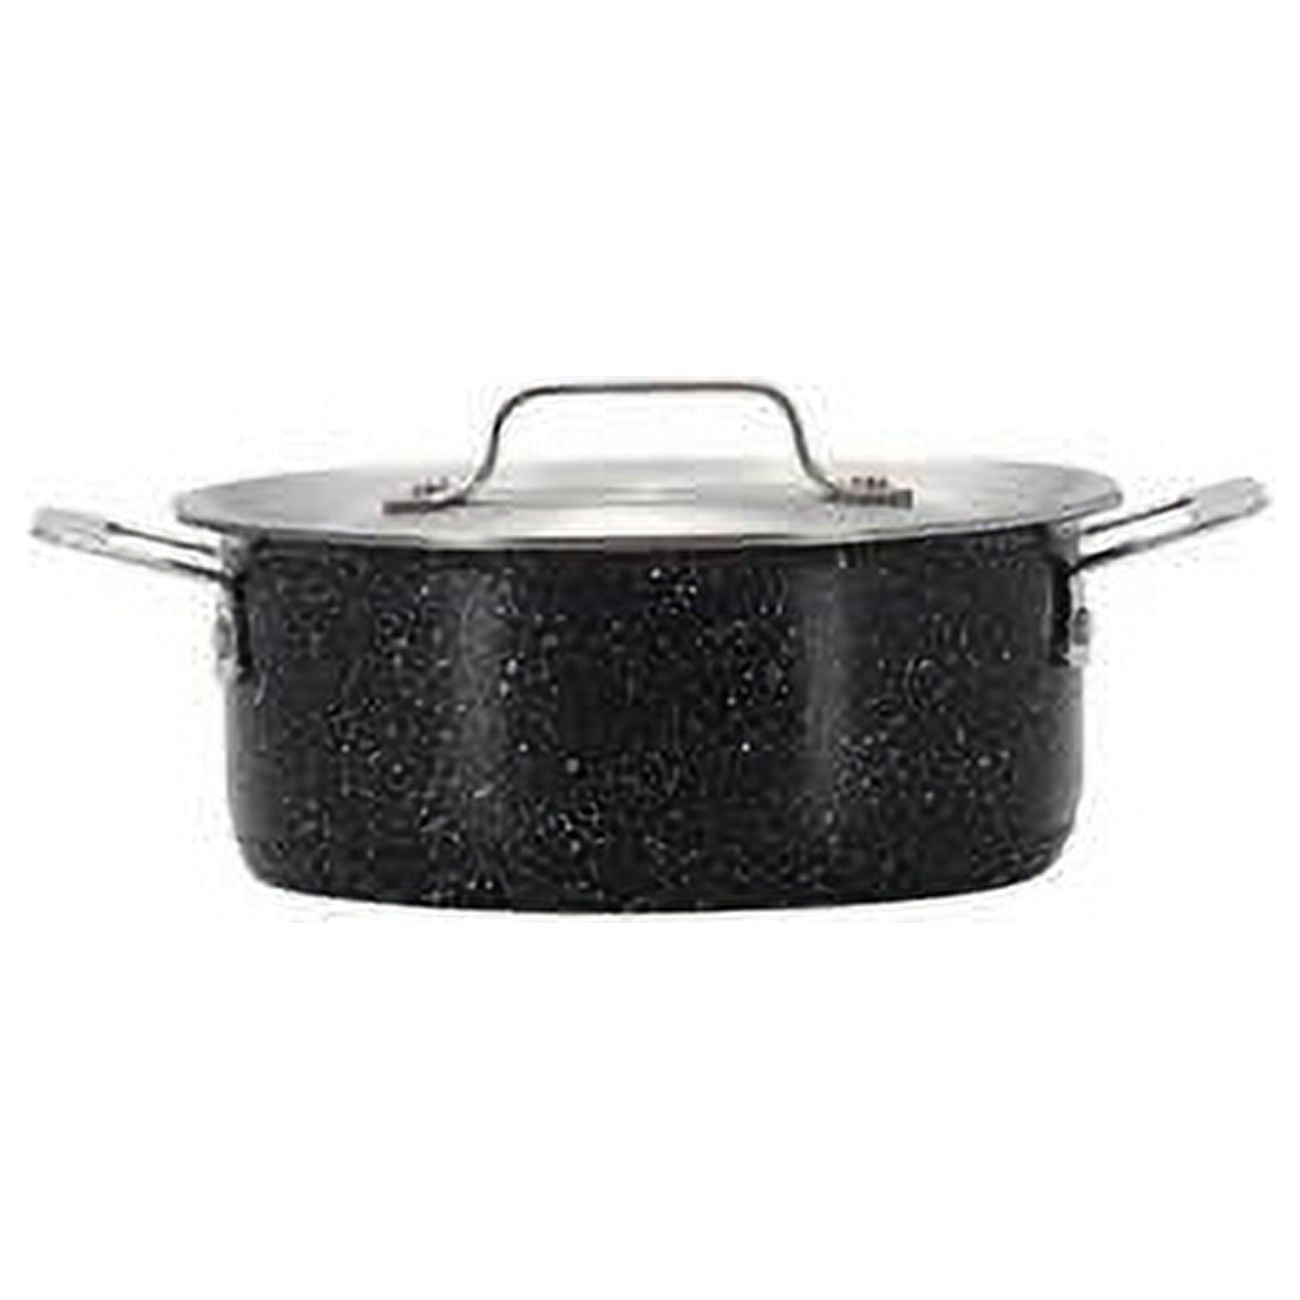 Picture of Bon Chef 60000GALAXY 3 qt Hotstone Galaxy Cucina Casserole with Lid - Induction Bottom